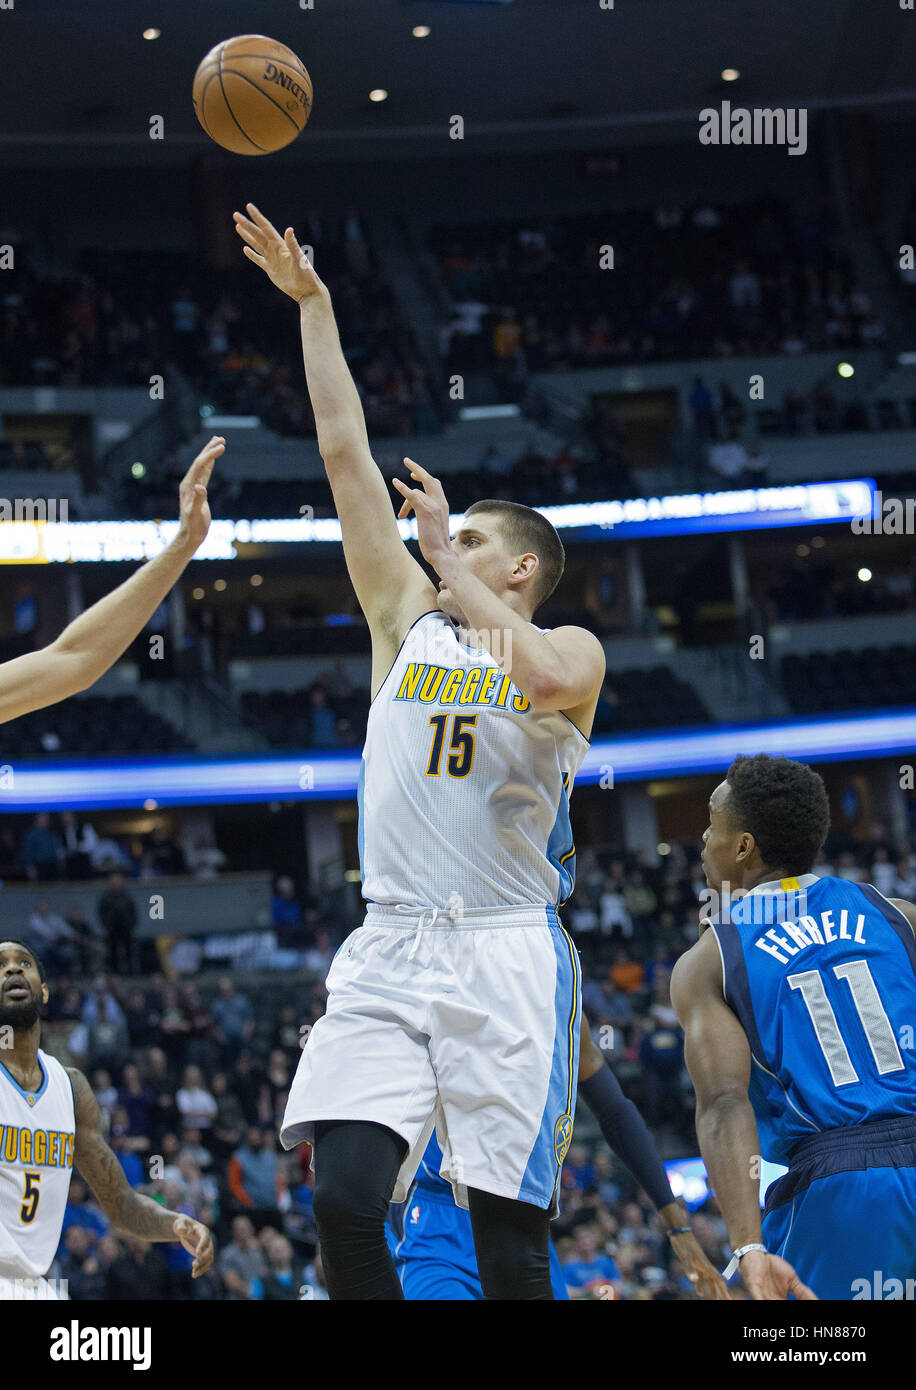 Denver, Colorado, USA. 6th Feb, 2017. Nuggets NIKOLA JOKIC, center, shoots for 2 in traffic during the 1st. Half at the Pepsi Center Monday night. The Nuggets beat the Mavericks 110-87. Credit: Hector Acevedo/ZUMA Wire/Alamy Live News Stock Photo